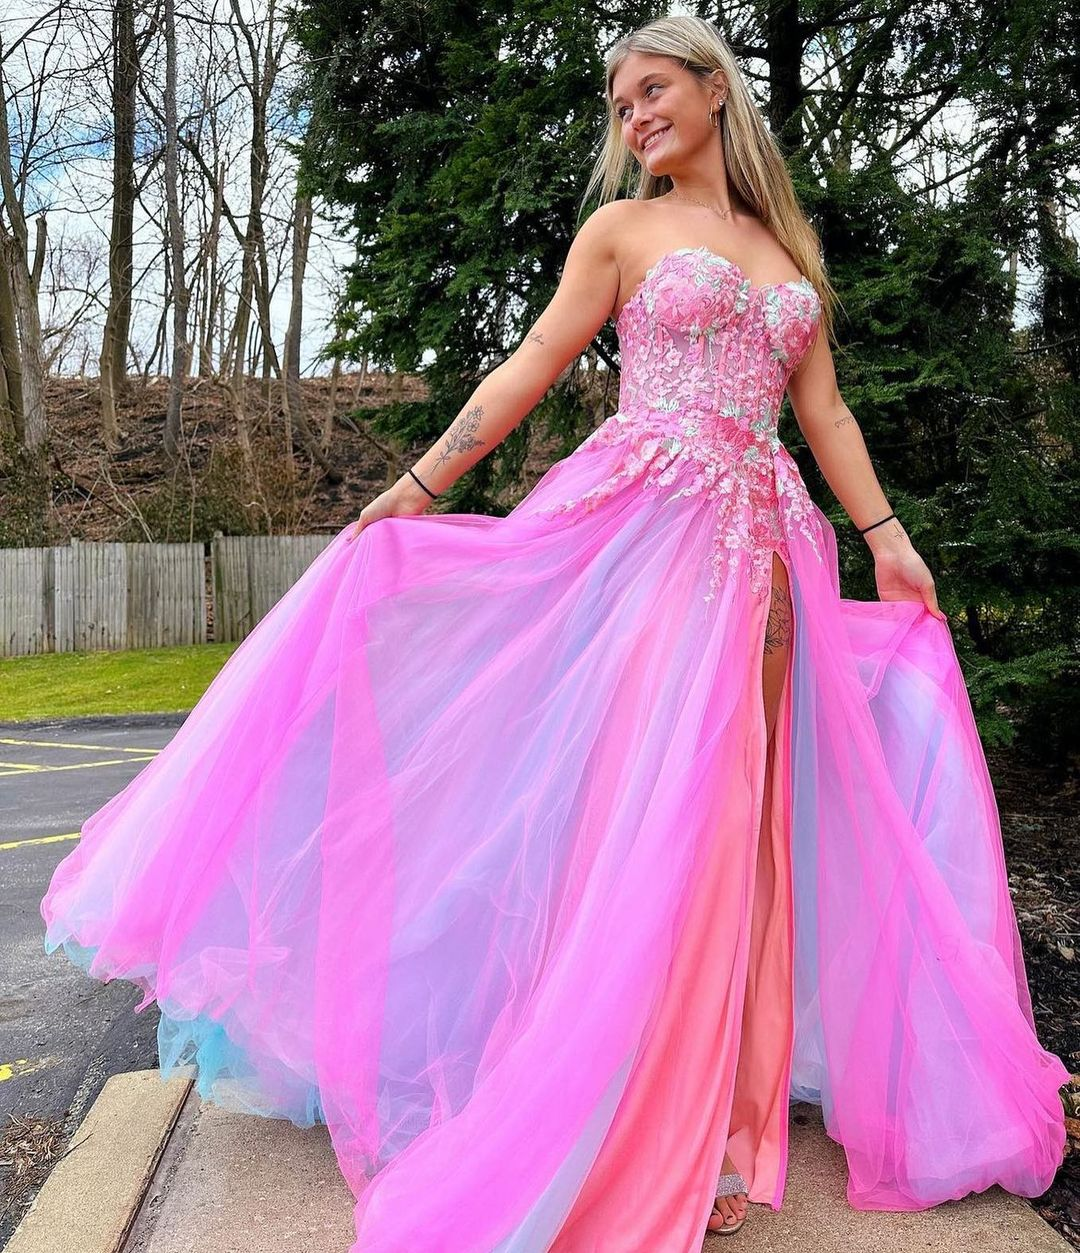 Blush Pink Ball Gown Quinceanera Dresses 2020 Long Sleeve Backless Lace  Applique Prom Party Gowns Sweet 16 Birthday Dress Vestido De 16 Anos From  Romantic_love_dress, $117.22 | DHgate.Com